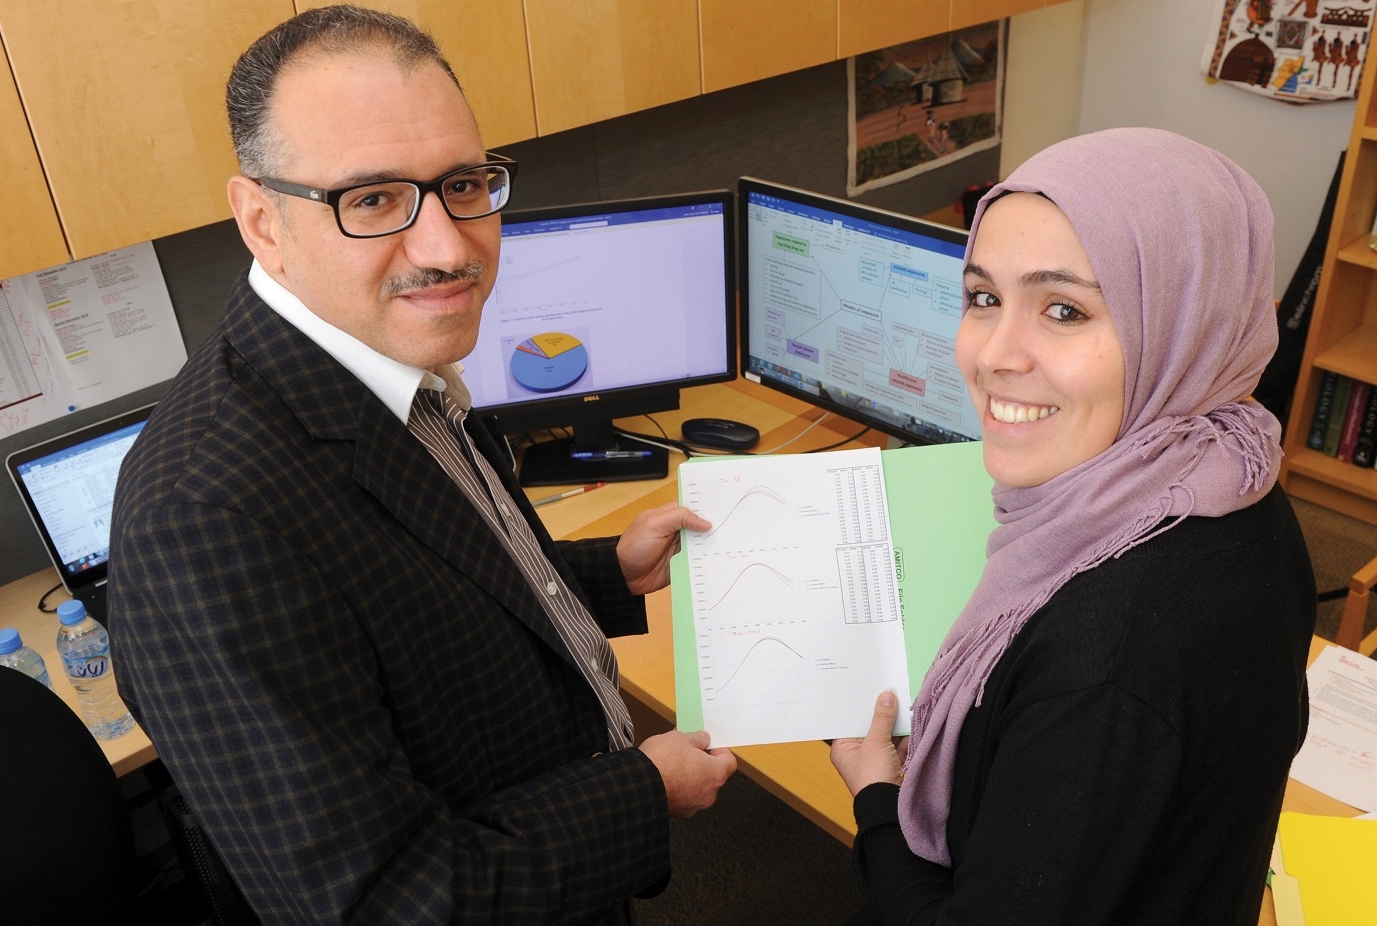 Laith Abu-Raddad and Susanne Awad holding a paper with charts and graphs